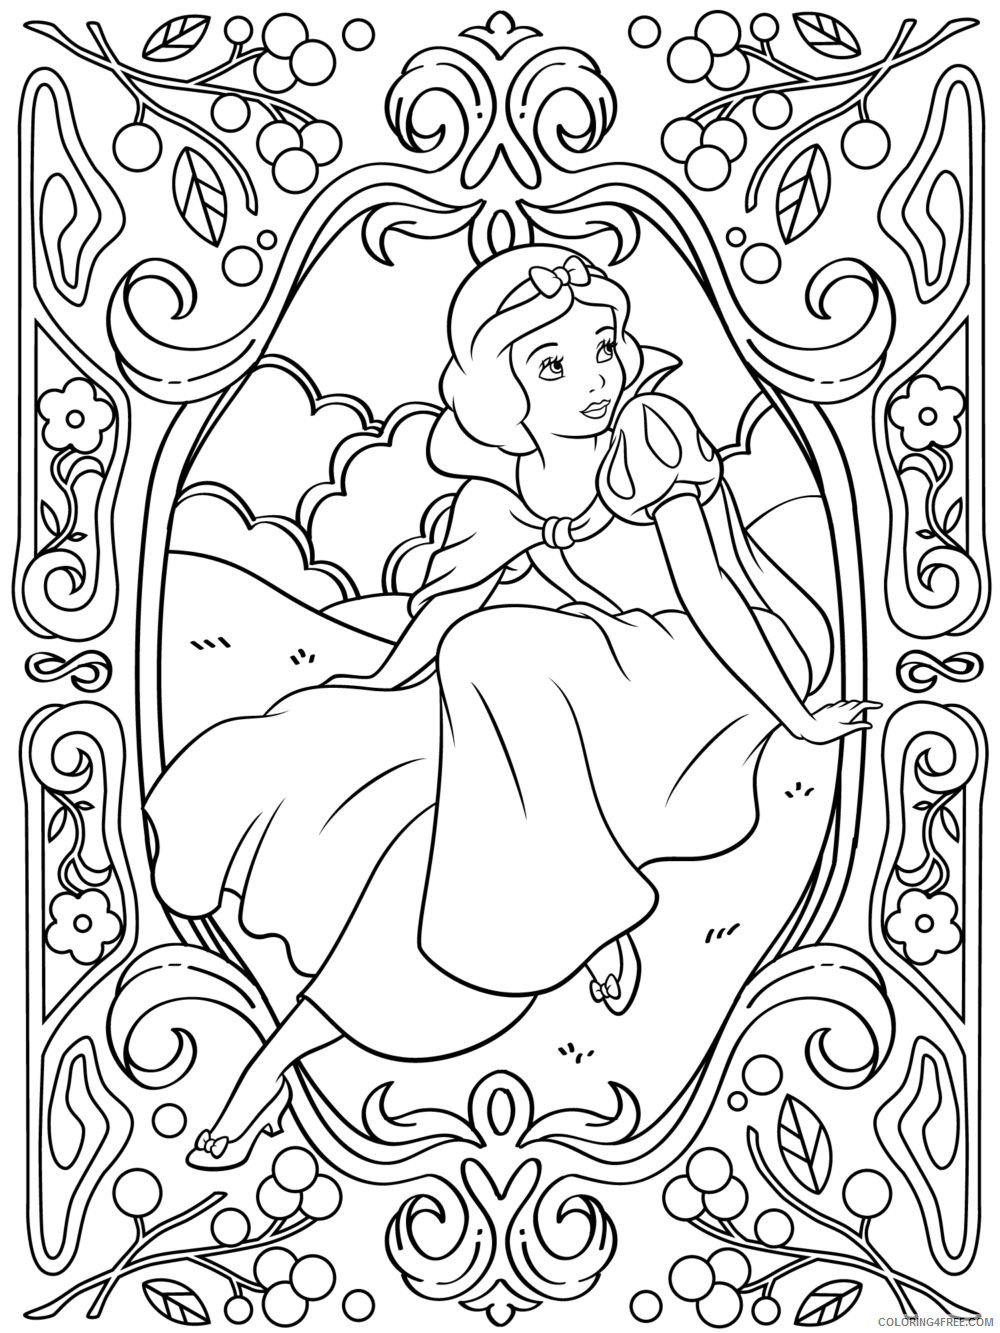 Snow White Coloring Pages Cartoons Snow White for Adults Printable 2020 5773 Coloring4free